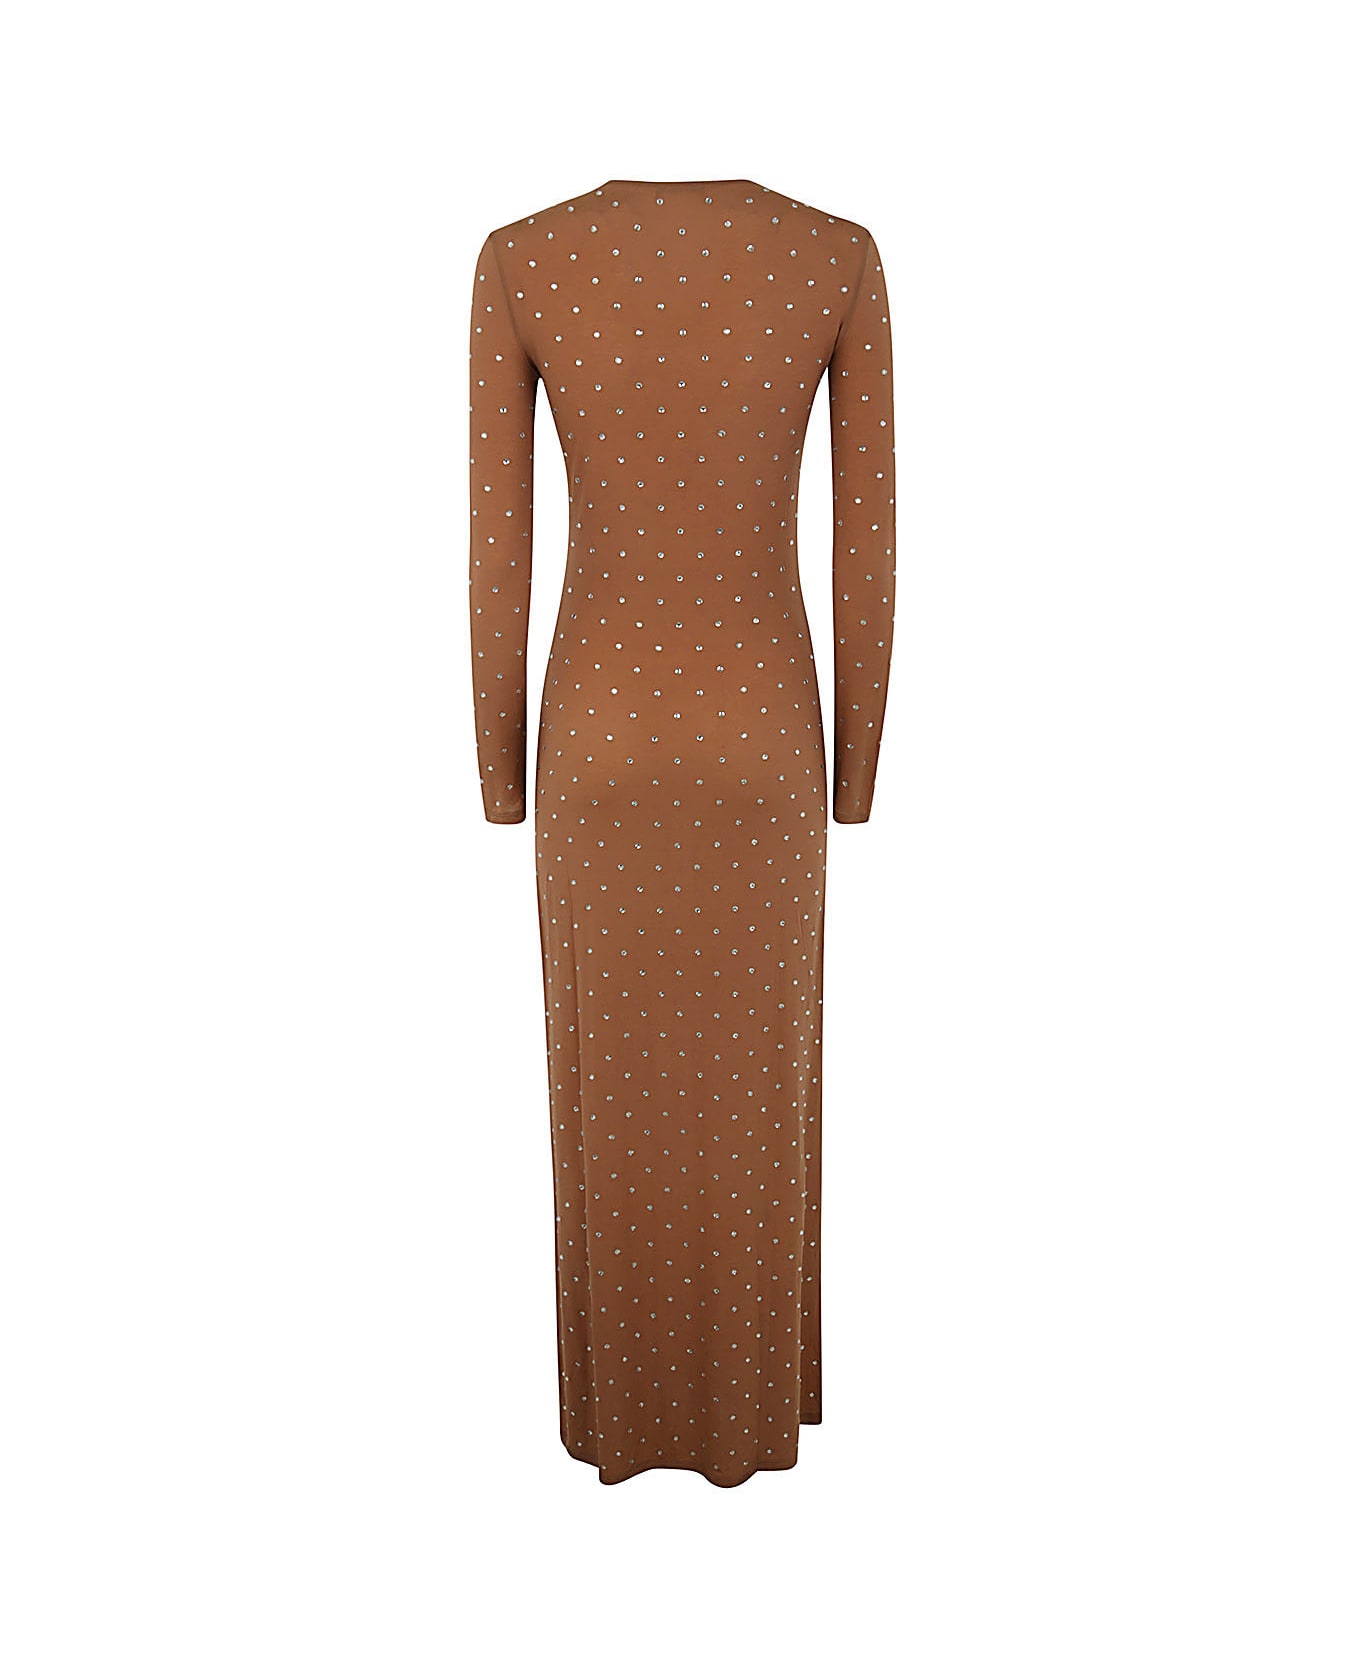 Paco Rabanne Solid Second Skin Jersey Dress - New Caramel